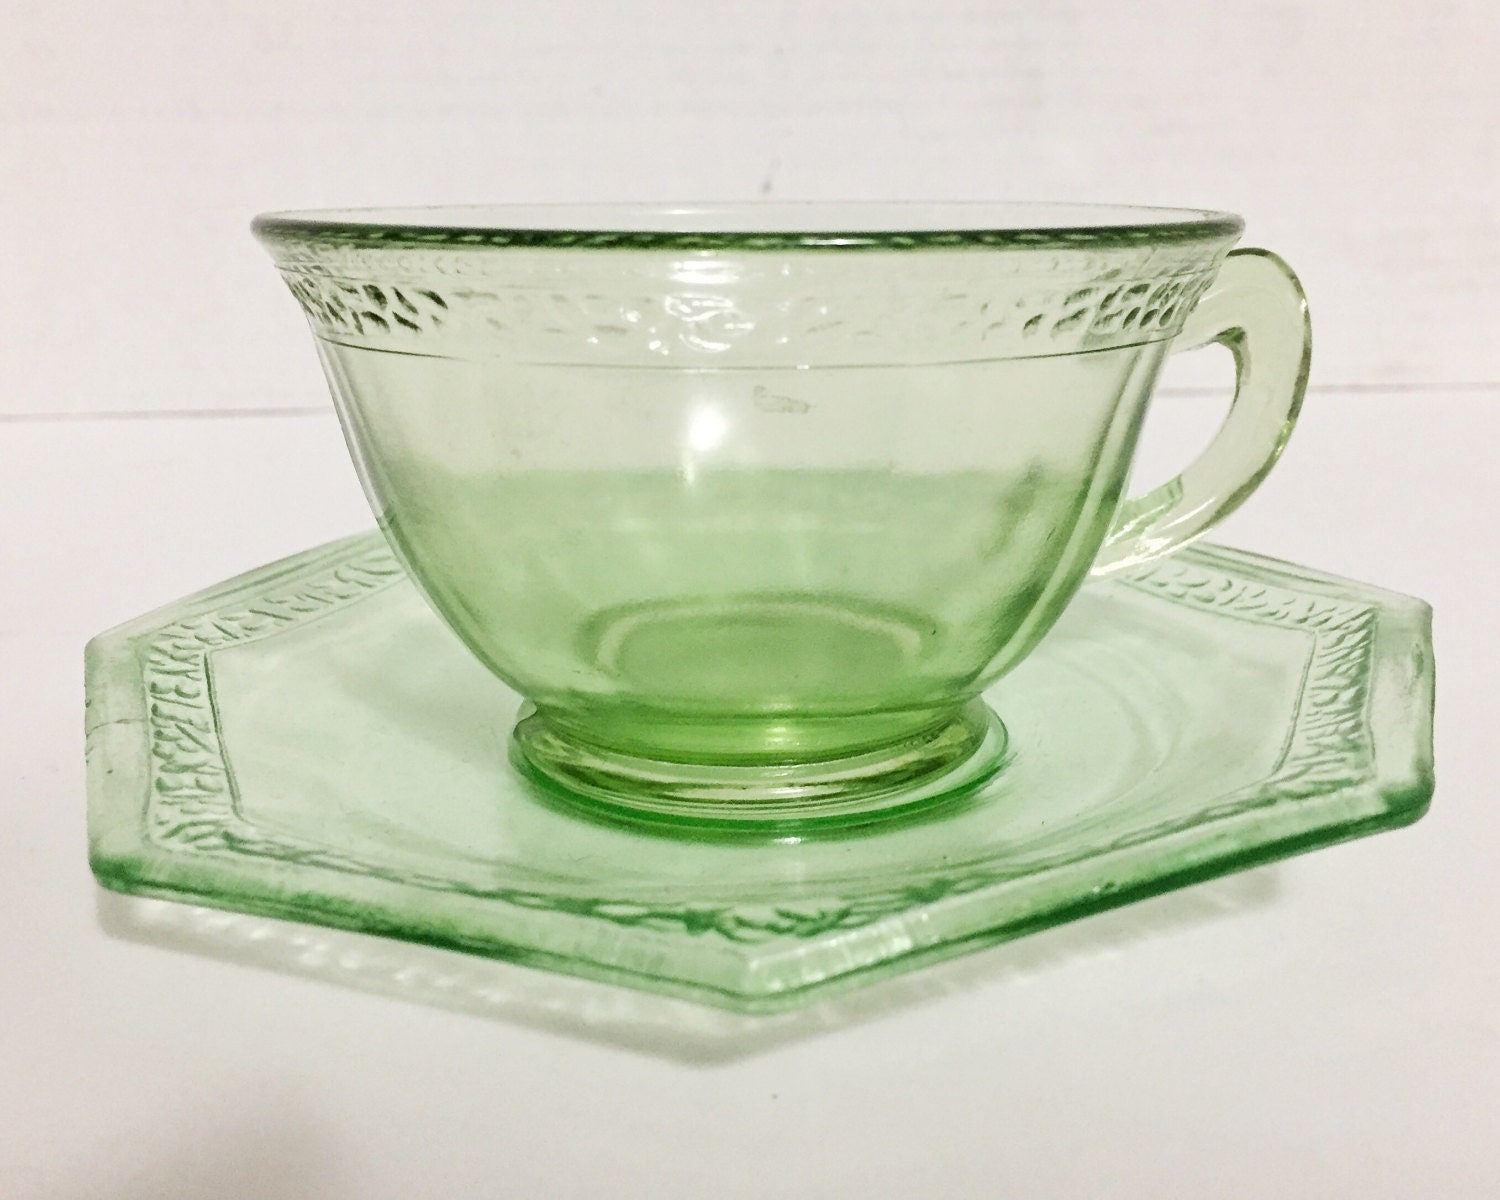 Vintage Green Pebbled Rim Teacup and Saucers by L.E. Smith ...